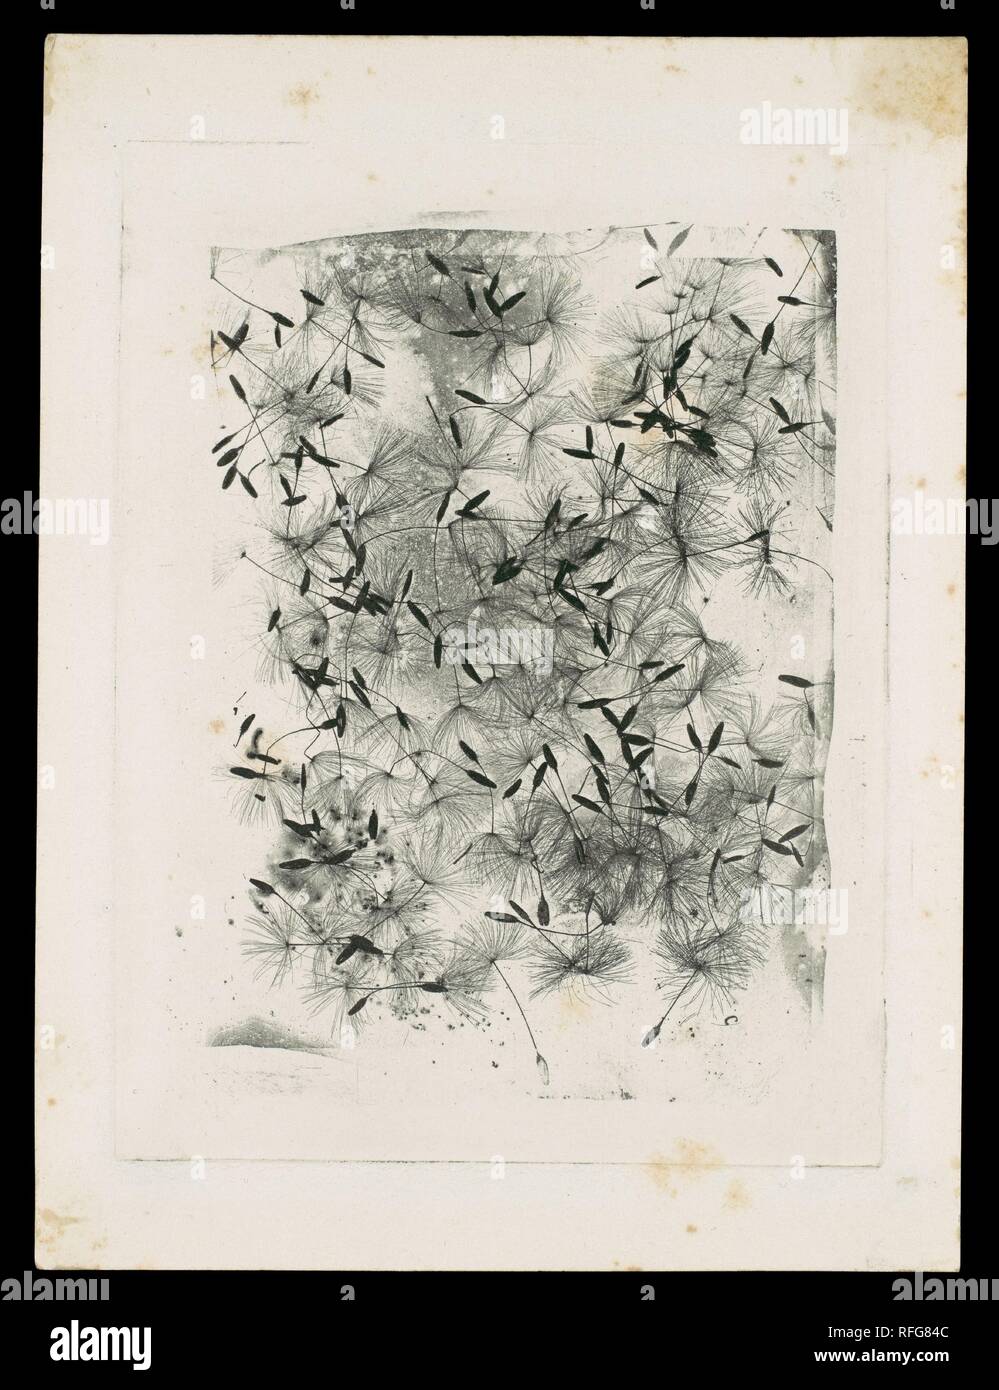 [Dandelion Seeds]. Artist: William Henry Fox Talbot (British, Dorset 1800-1877 Lacock). Dimensions: Sheet: 15.1 x 11.3 cm (5 15/16 x 4 7/16 in.)  Plate: 12.5 x 9.4 cm (4 15/16 x 3 11/16 in.)  Image: 10.5 x 7.6 cm (4 1/8 x 3 in.). Date: 1858 or later.  This experimental proof is a fine example of the capacity of Talbot's 'photoglyphic engraving' to produce photographic results that could be printed on a press, using printer's ink-a more permanent process than photographs made with light and chemicals. Like Talbot's earliest photographic examples, the image here was photographically transferred  Stock Photo